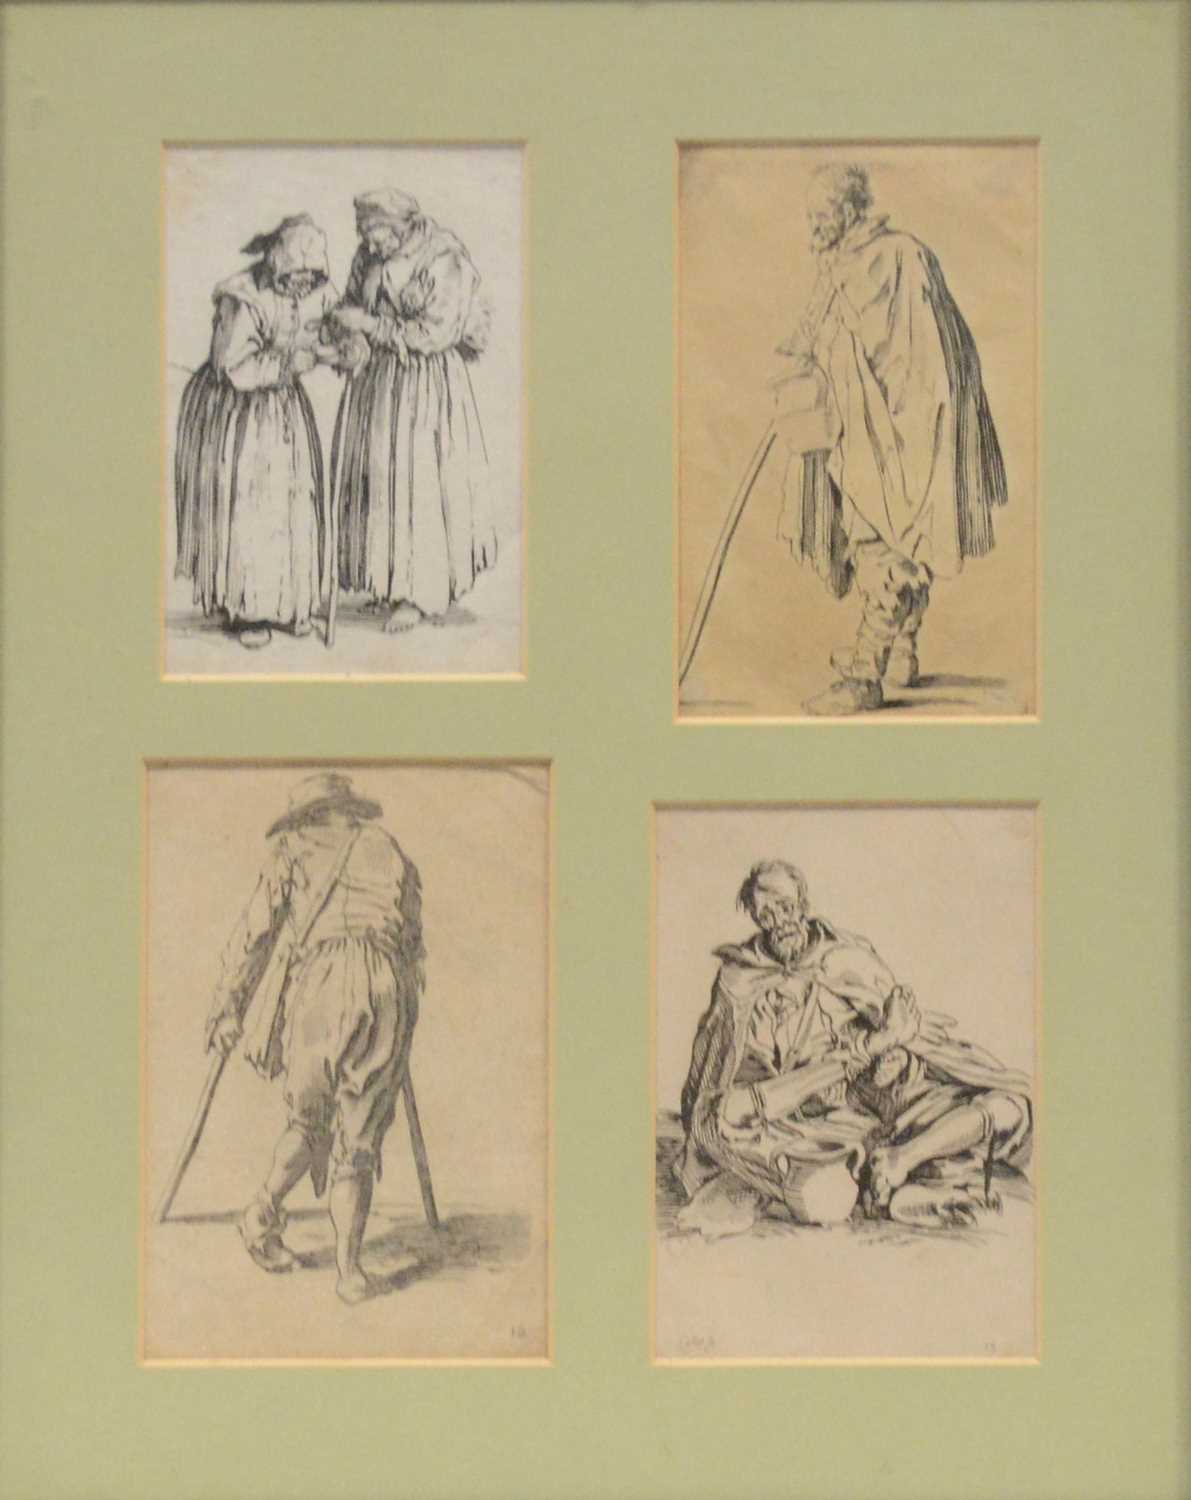 After Jacques Callot, various prints from Les Gueux series - Image 2 of 4